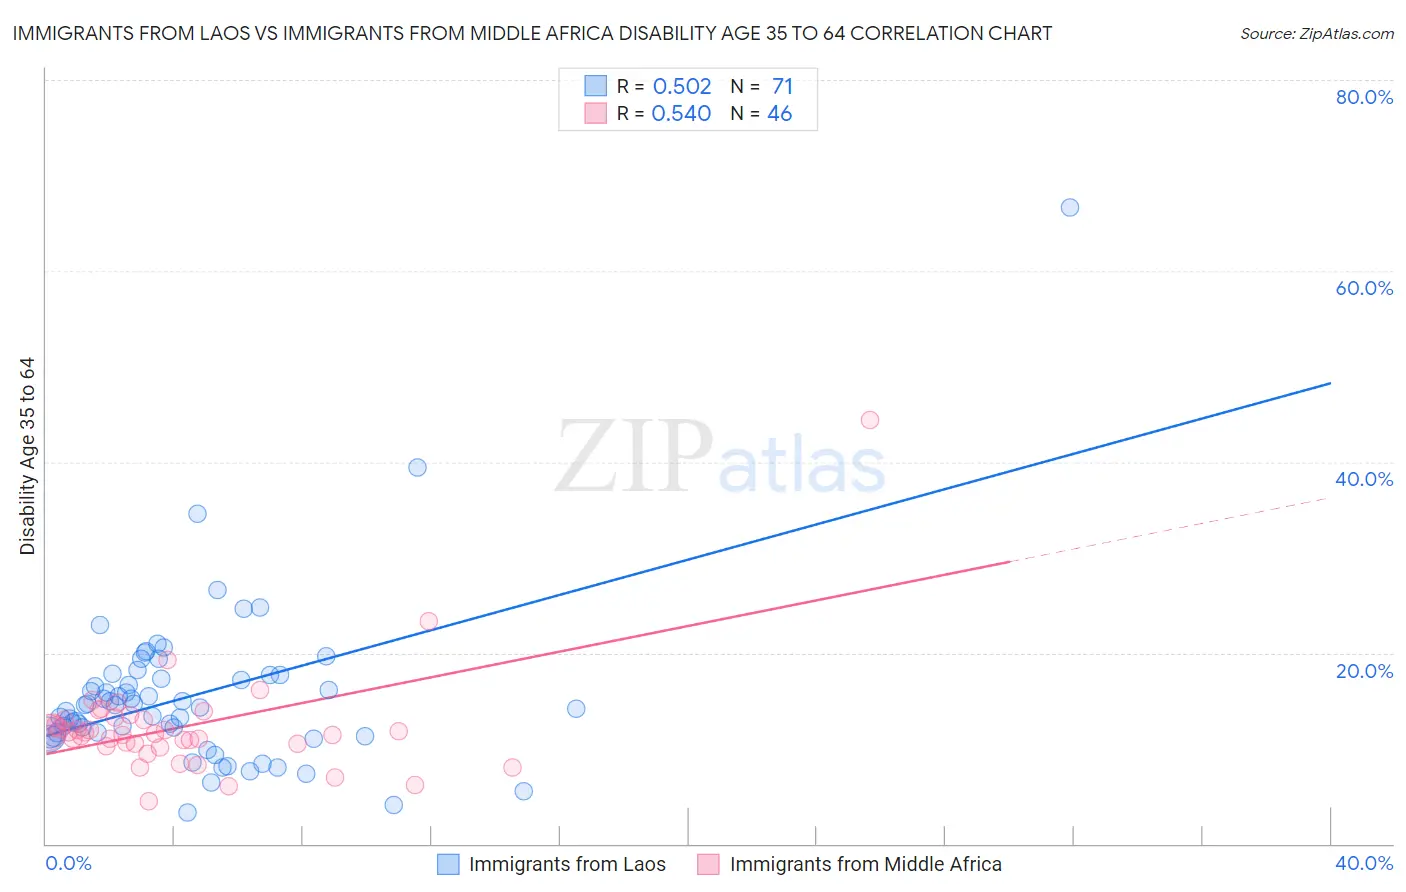 Immigrants from Laos vs Immigrants from Middle Africa Disability Age 35 to 64